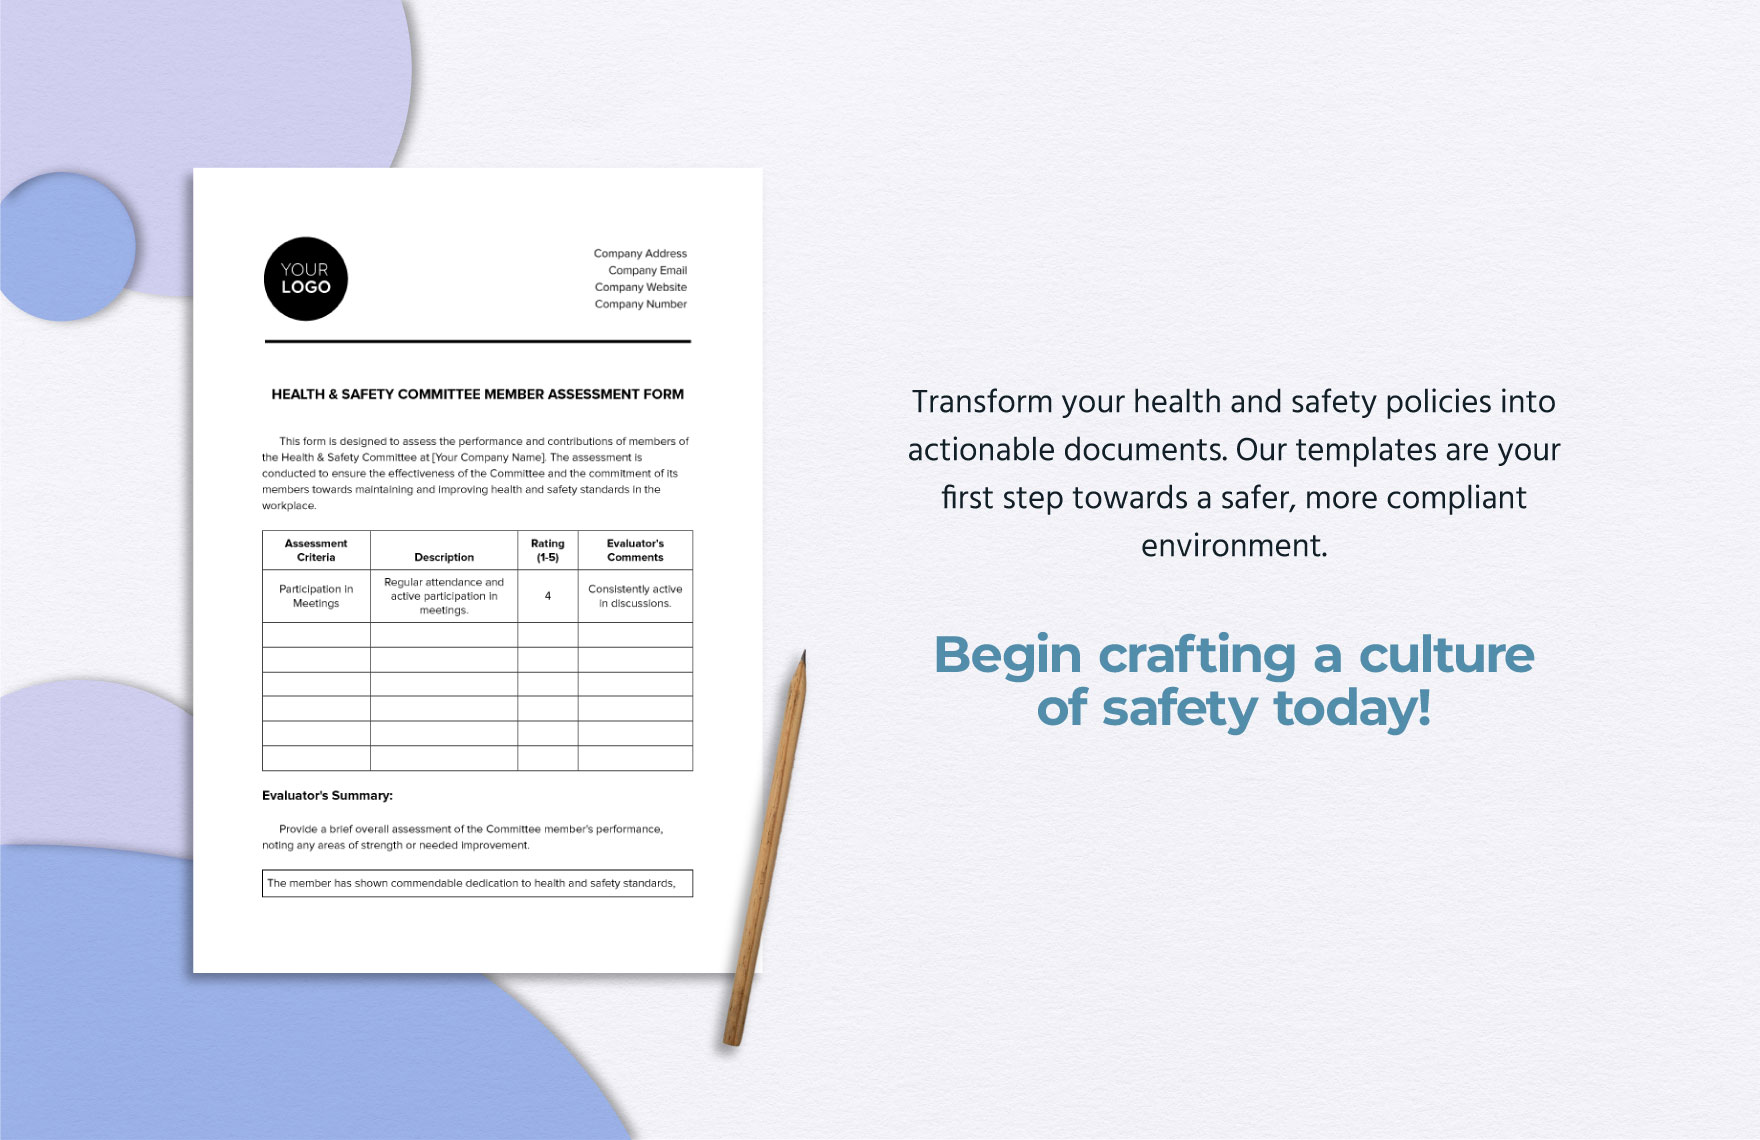 Health & Safety Committee Member Assessment Form Template